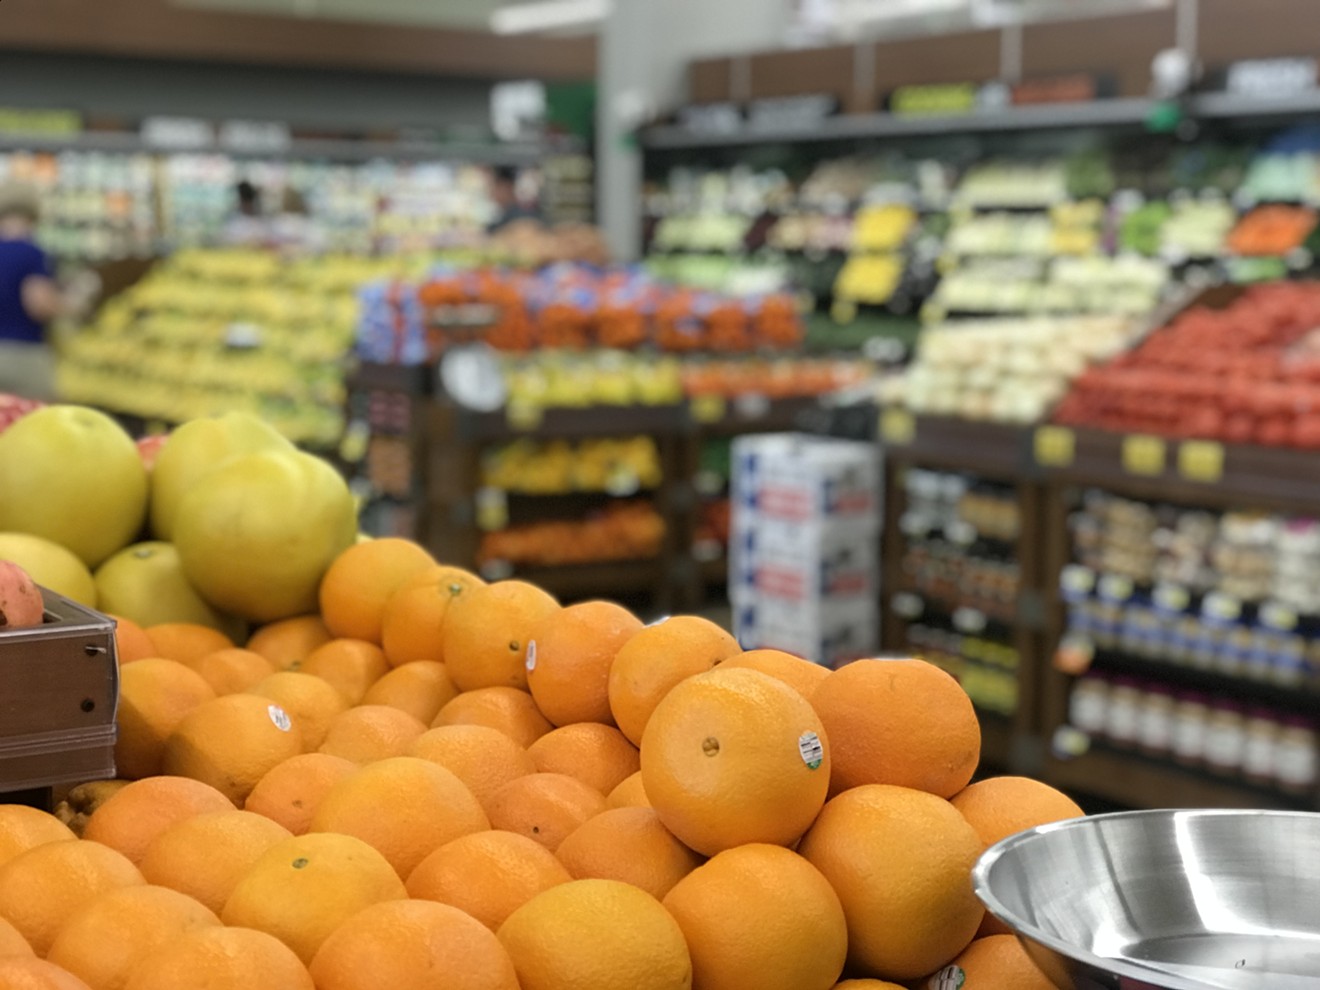 Proposed SNAP changes would make it harder for some Texans to afford healthy food.